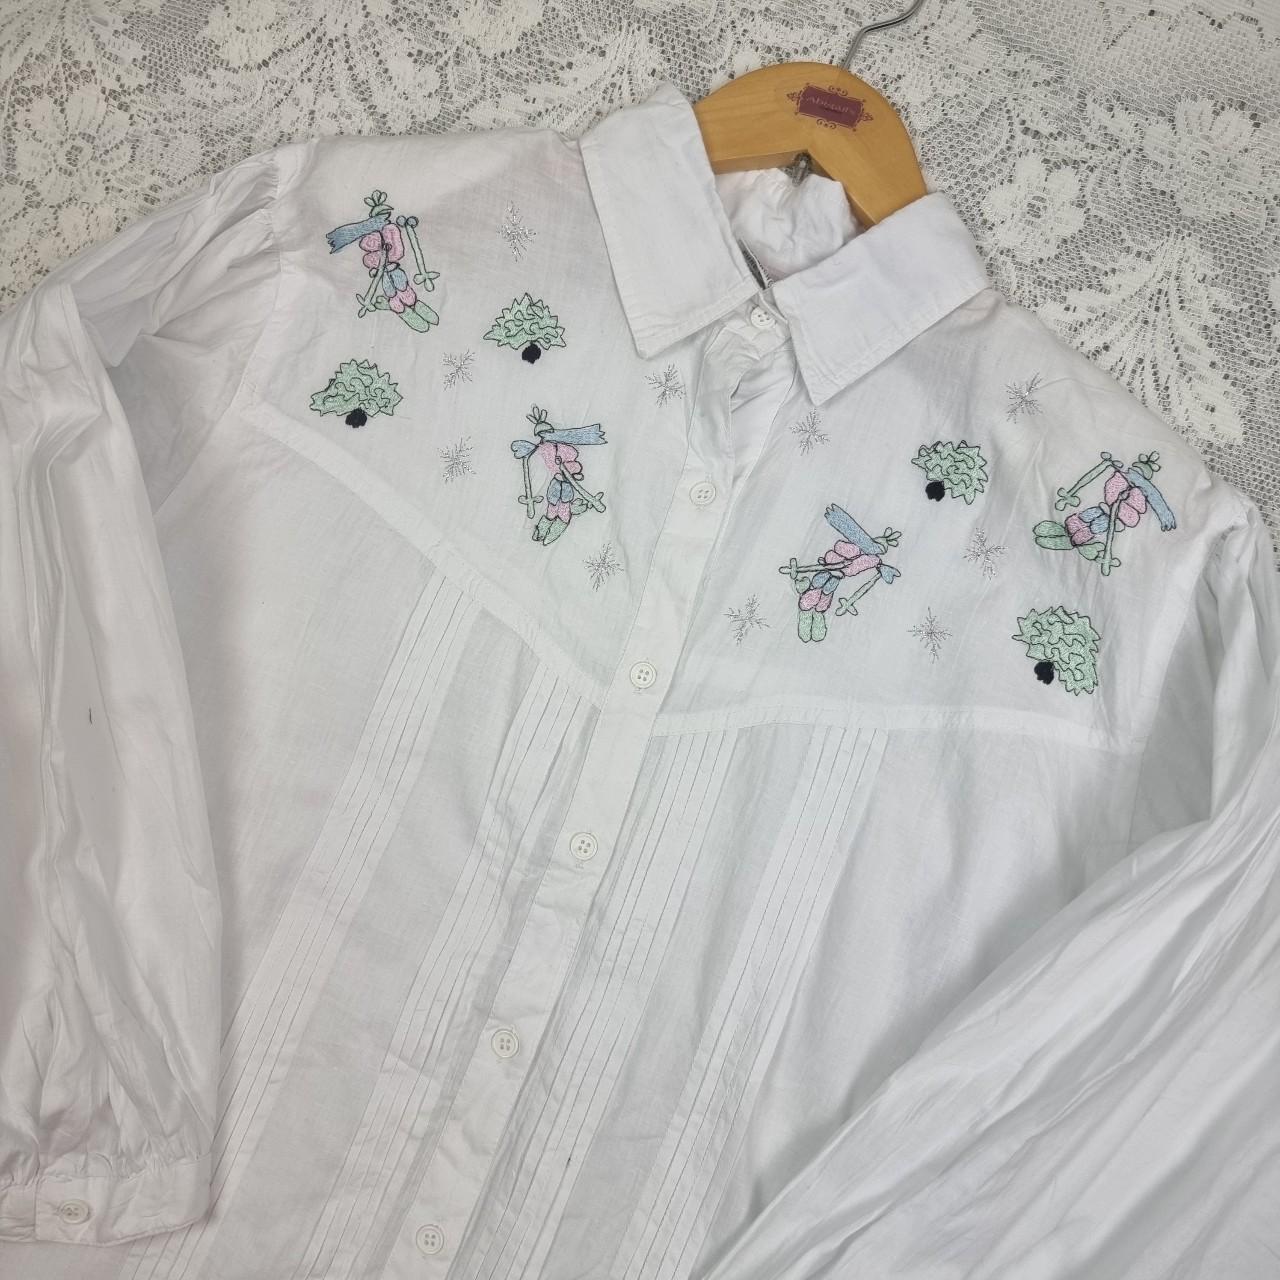 Women's White and Blue Blouse | Depop